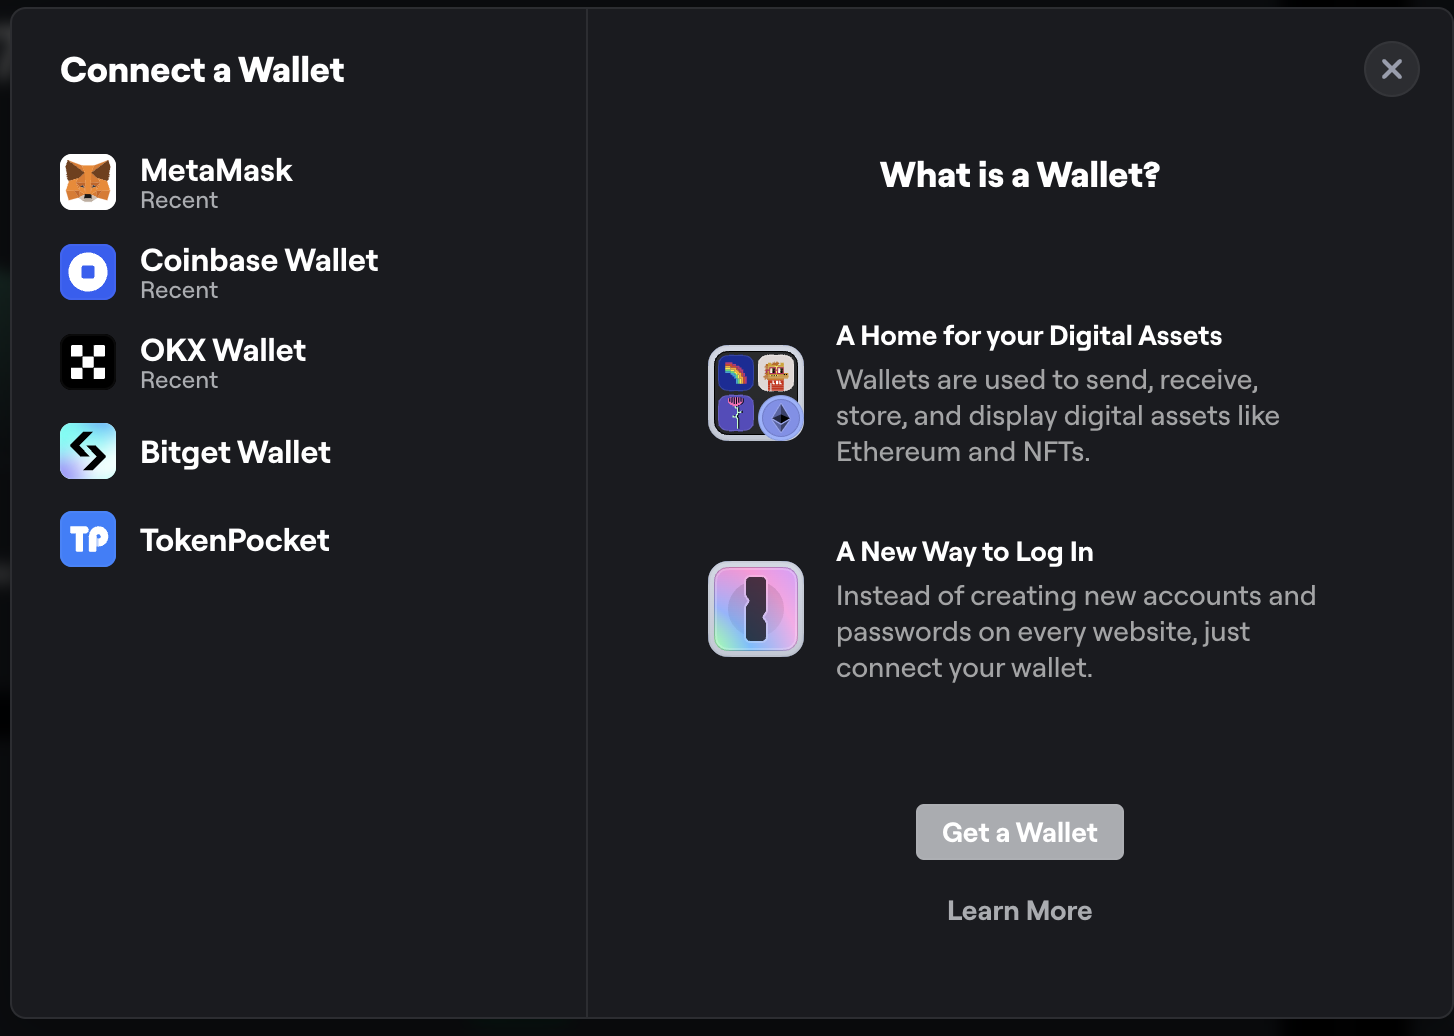 Connect a Wallet